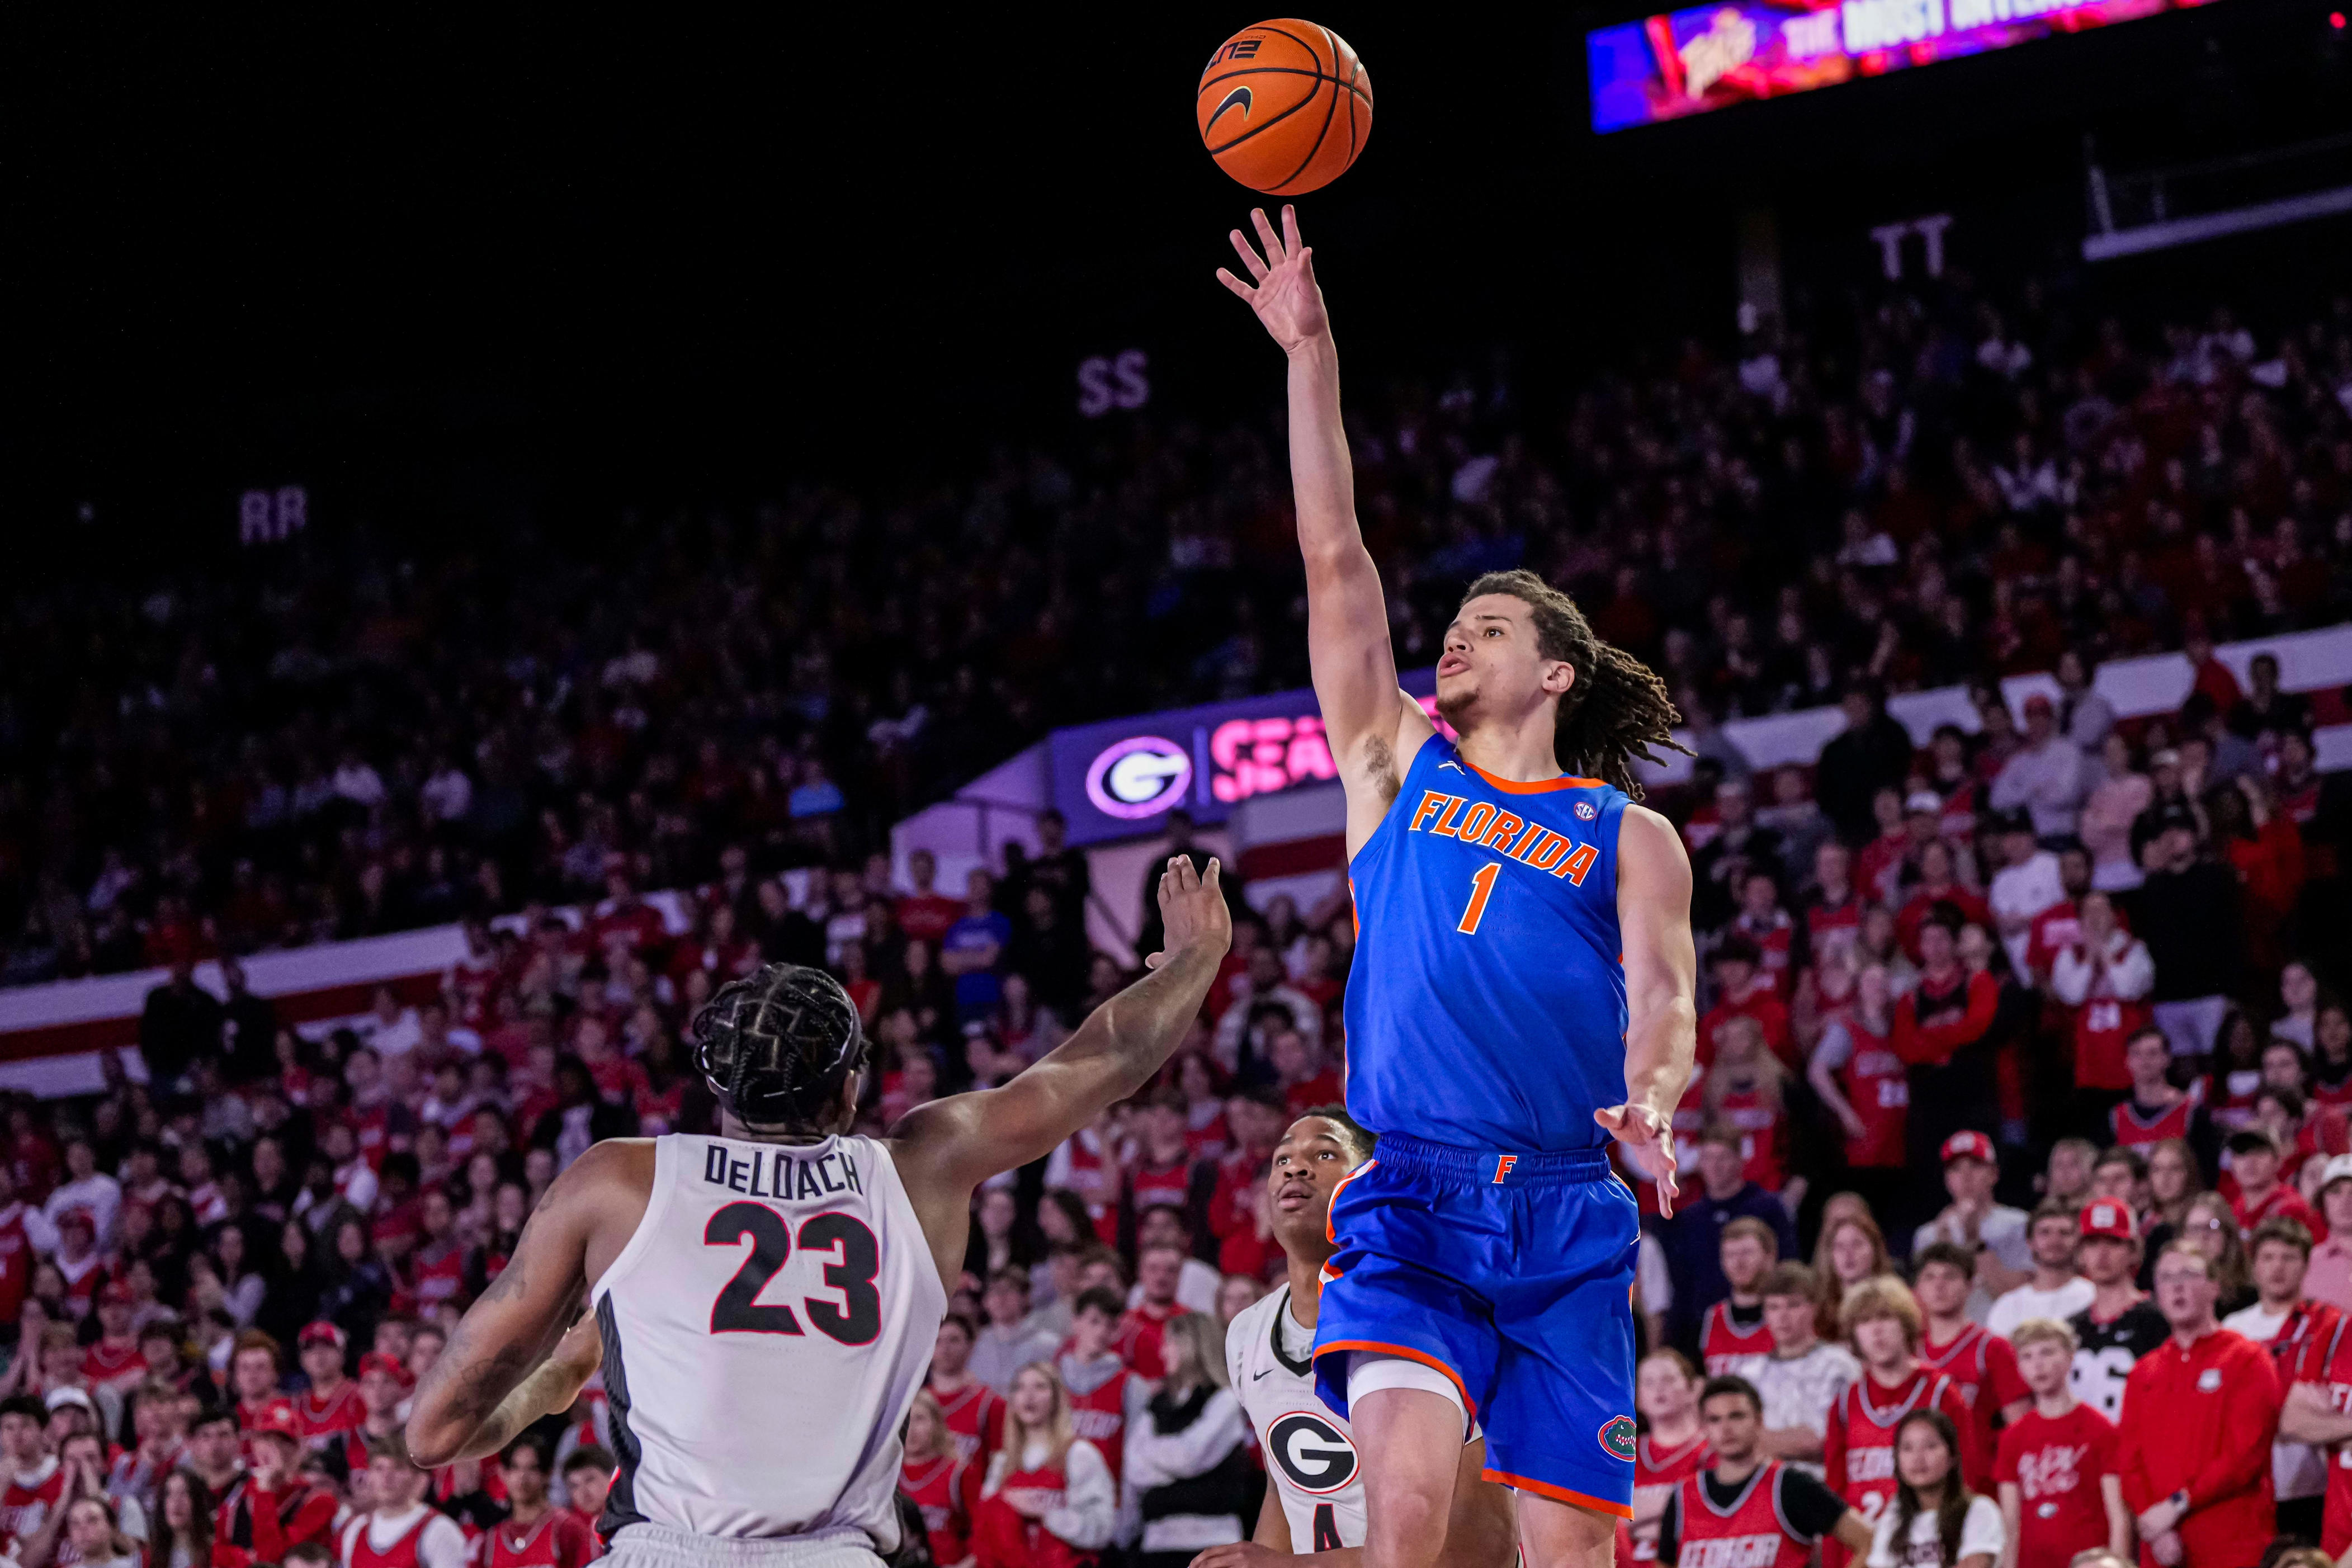 florida enters net rankings top 30 after road win at georgia